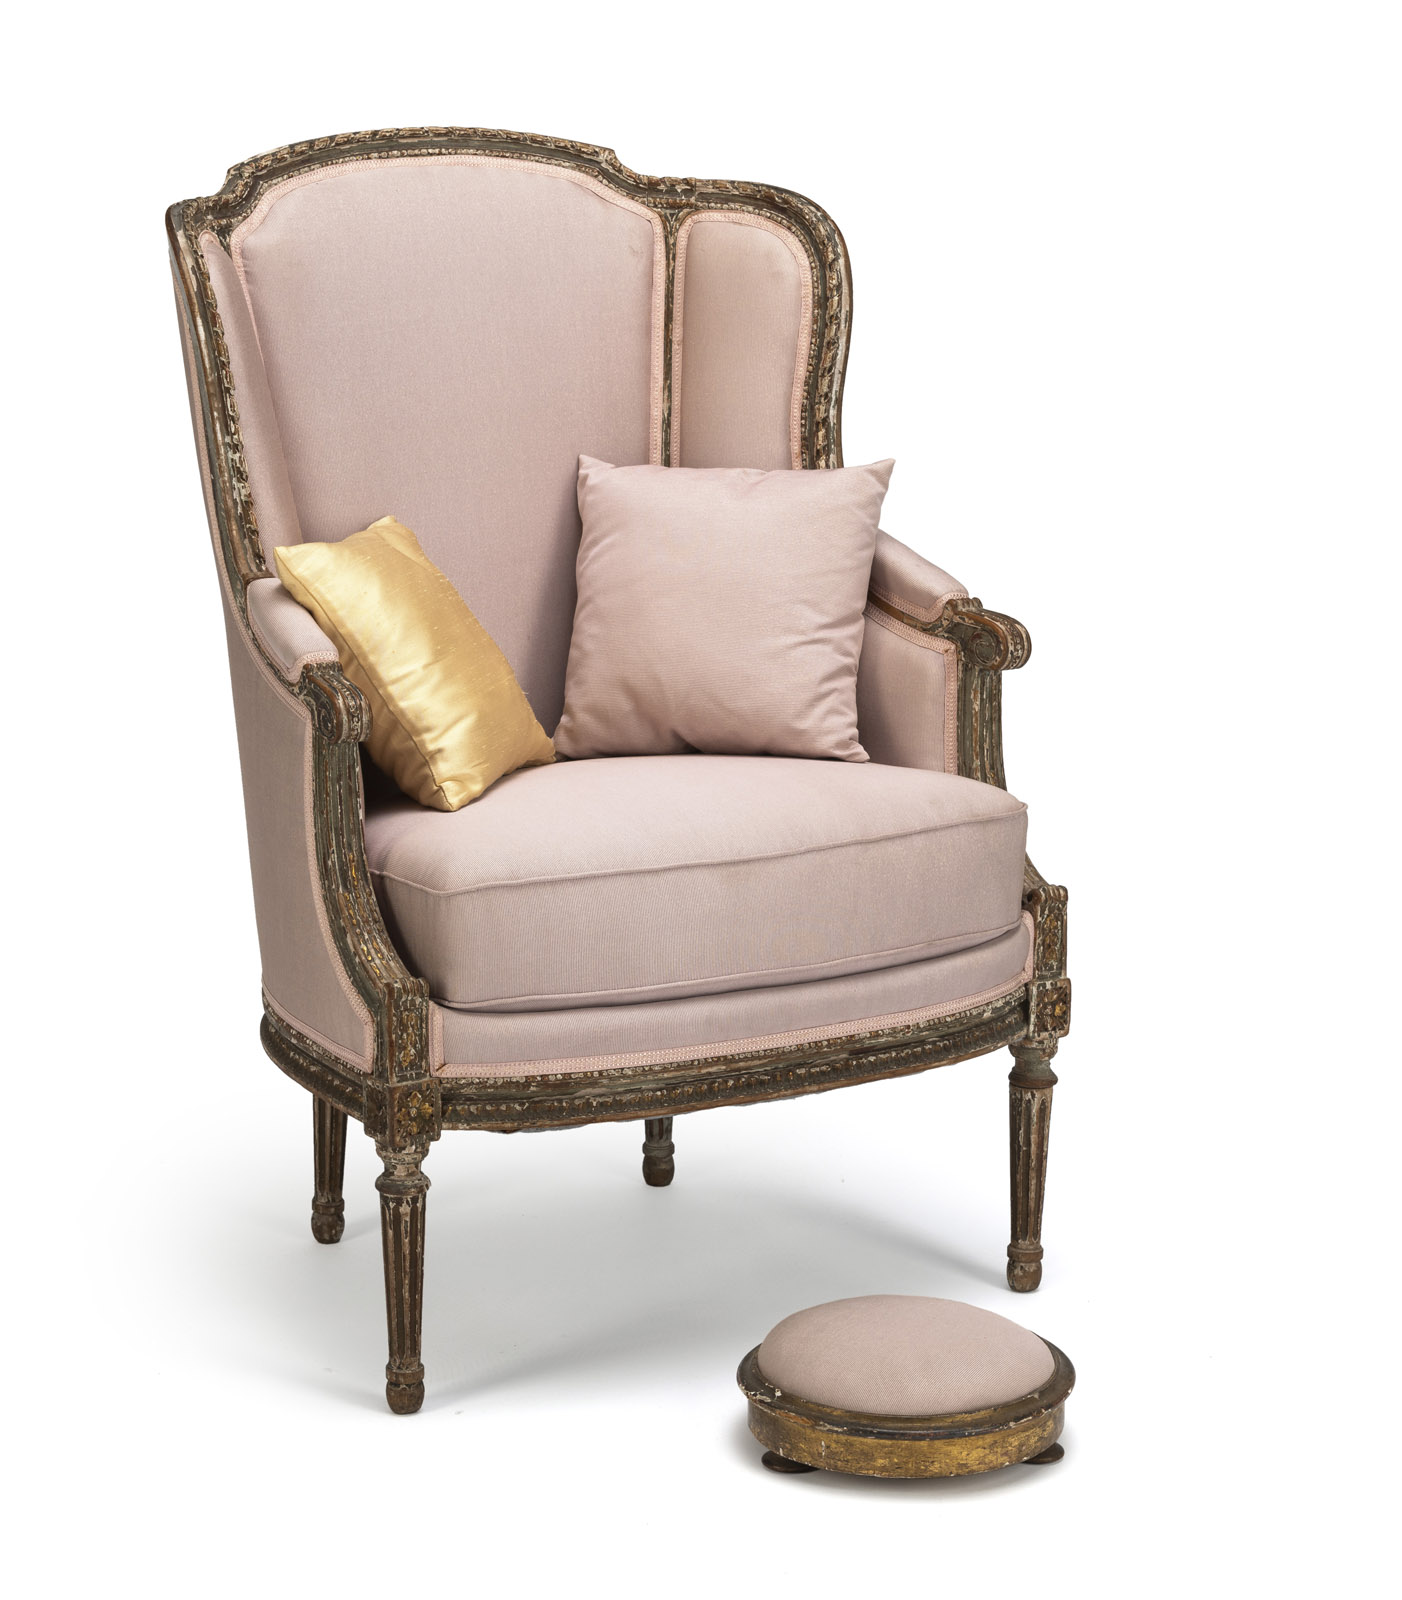 <b>A LOUIS XVI STYLE POLYCHROME AND PARCEL- GILT PAINTED FAUTEUIL</b>